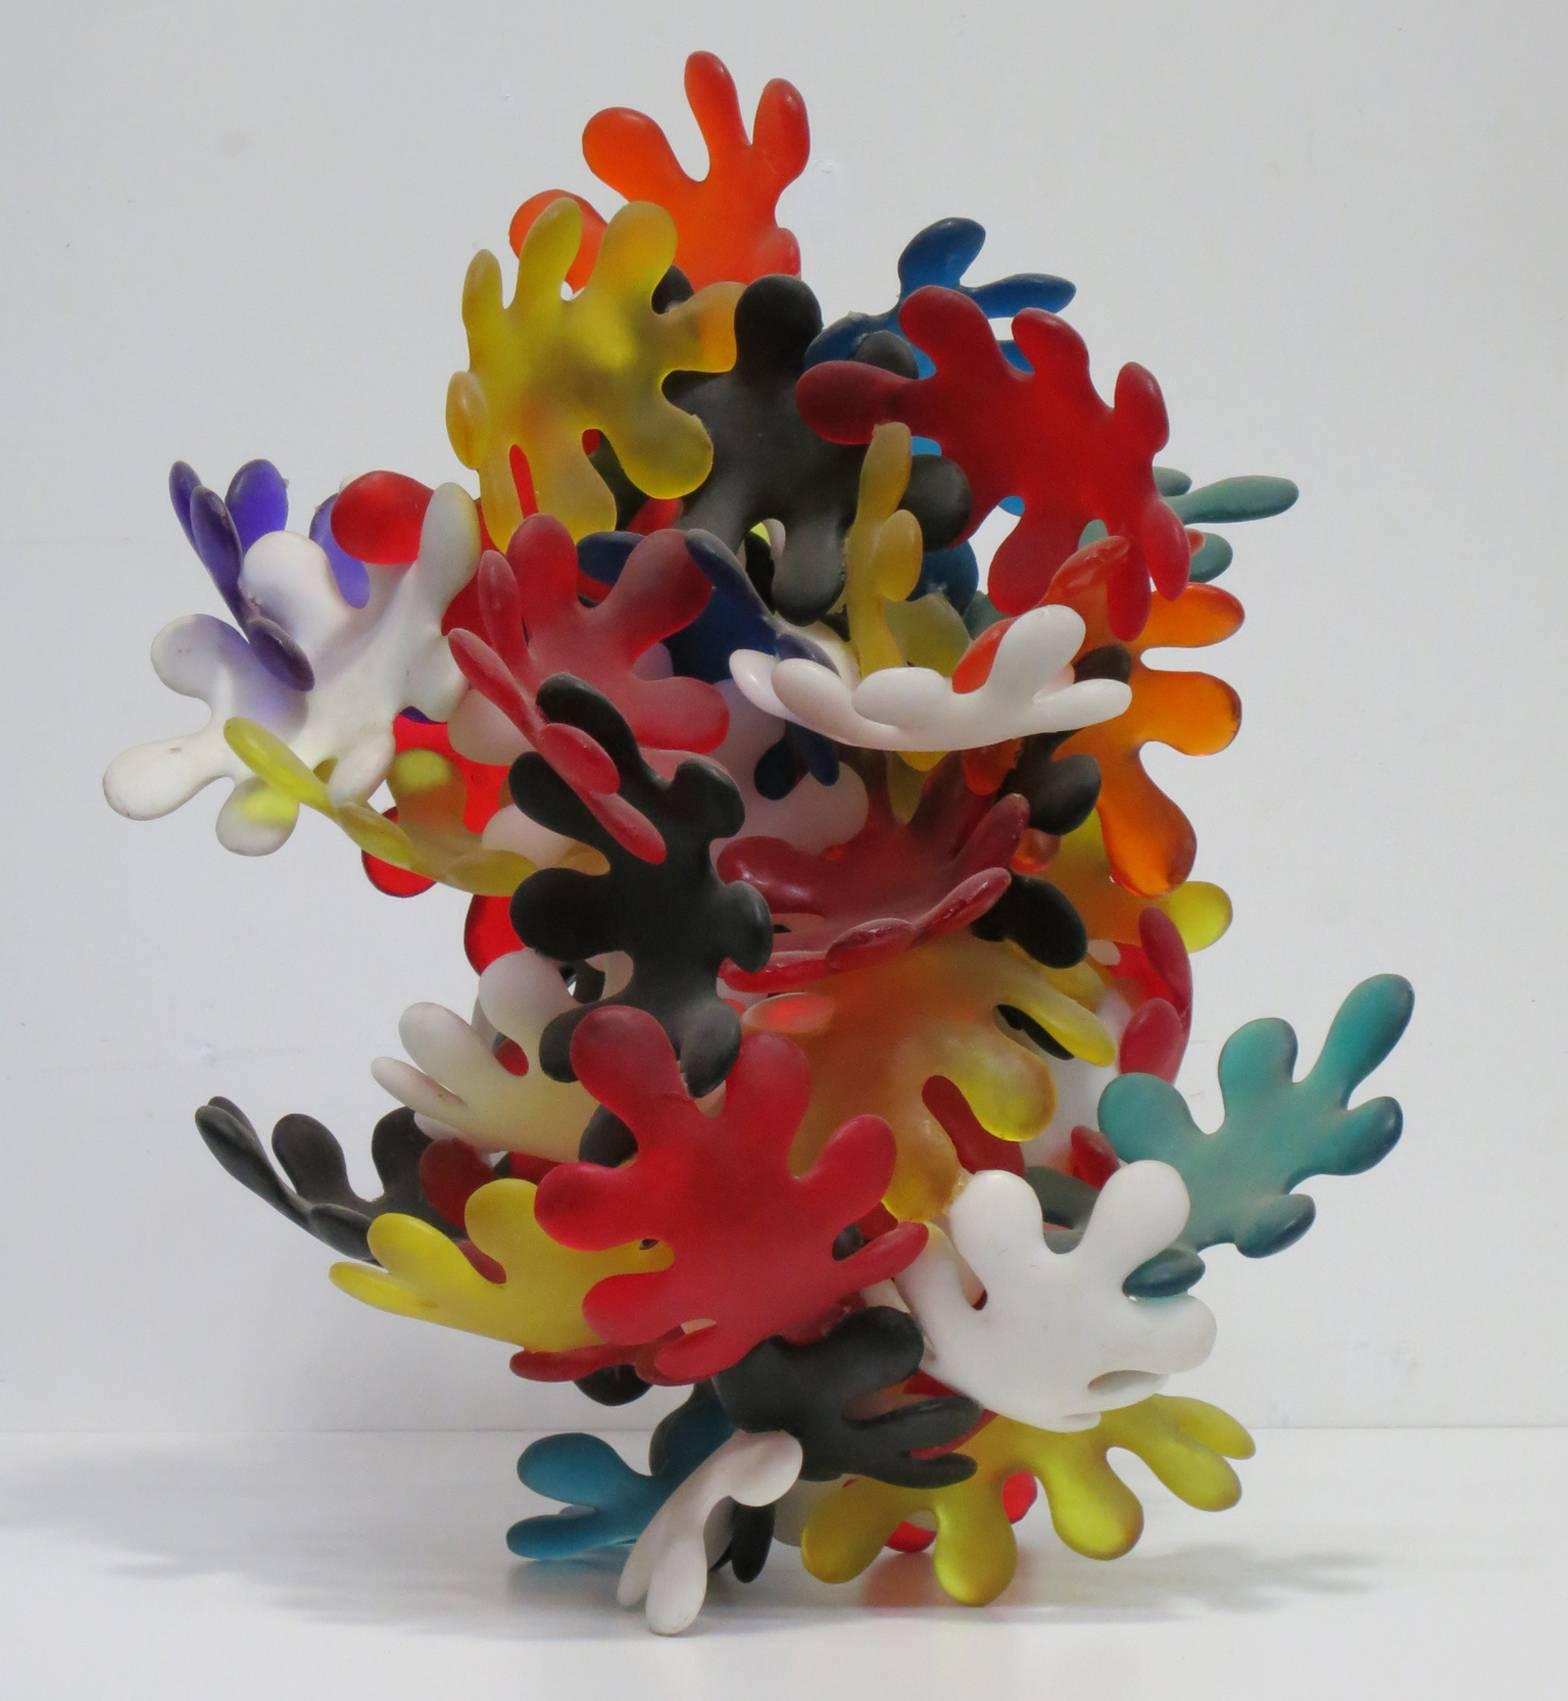 Inside 11 (Campers), resembles a bouquet of playful leaf-like forms in translucent yellow, red, blue, and green. To Kalish, the most important factor in determining what a sculpture will become is the structural principle. The juxtaposition of forms